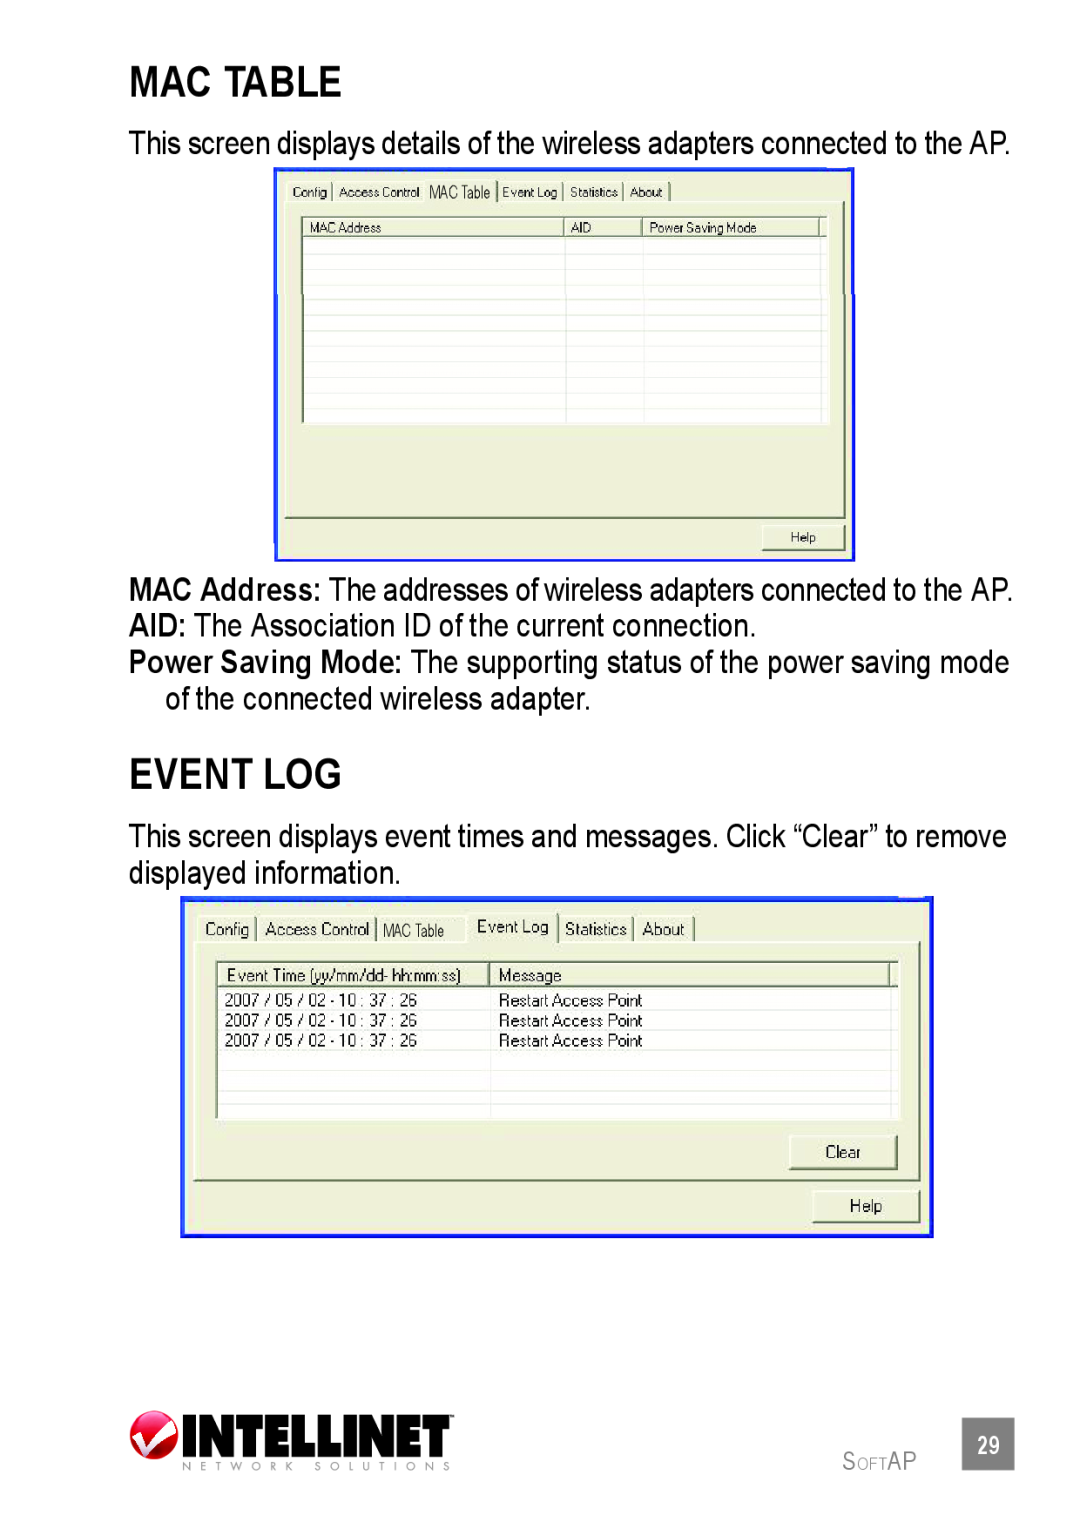 Intellinet Network Solutions 524438 user manual mac table, event log 